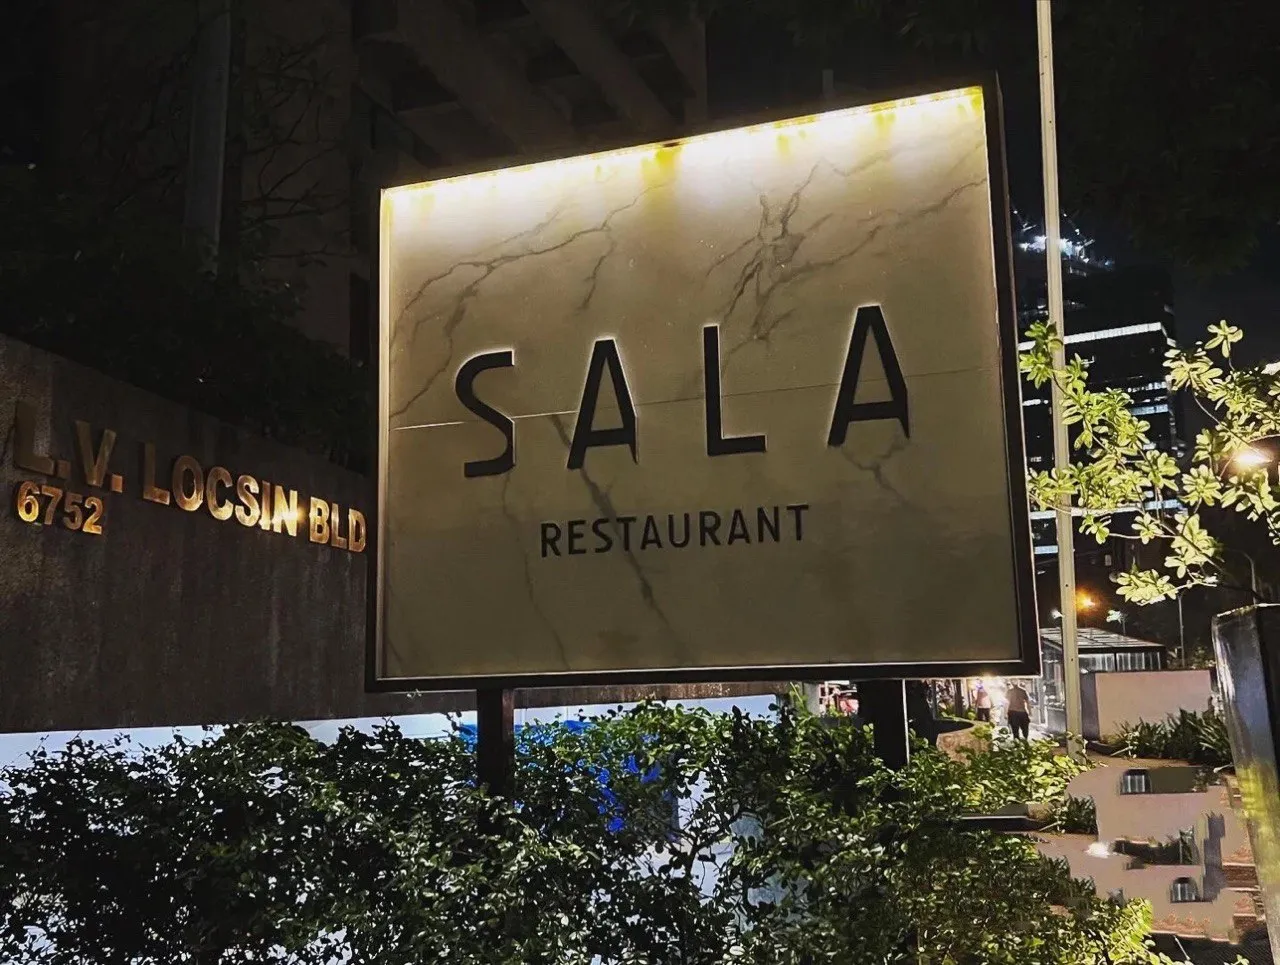 📍The SALA Restaurant📍 马尼拉周边餐| Gallery posted by